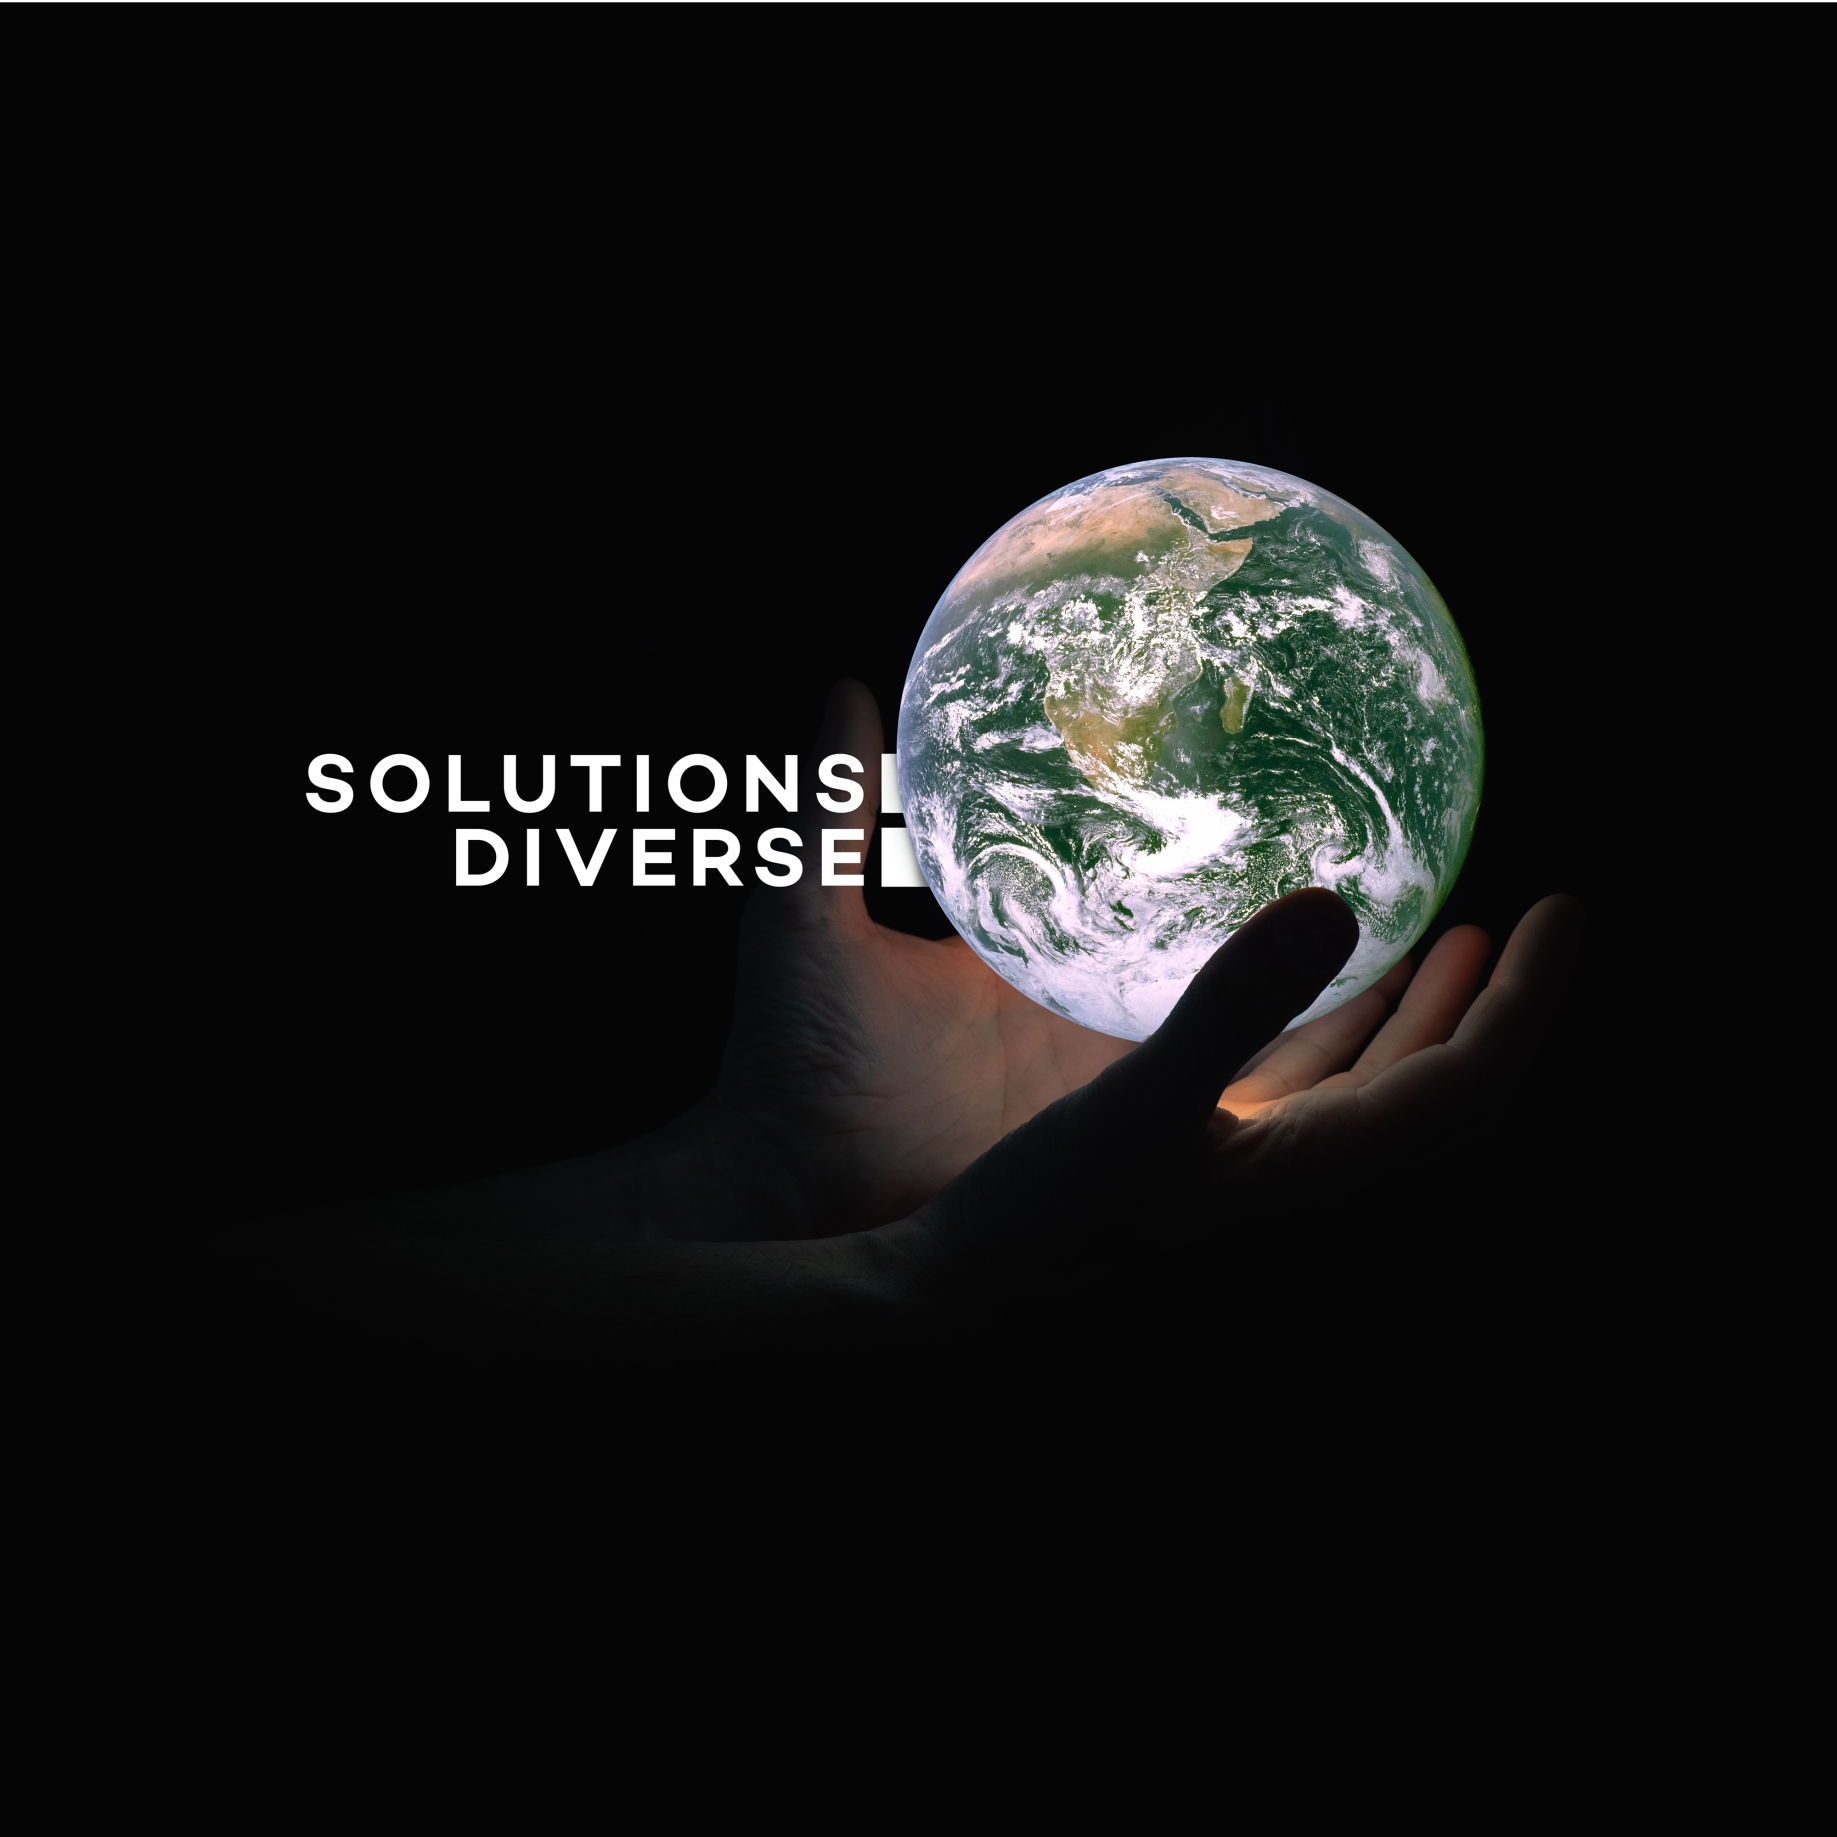 Solutions Diverse - Sustainability